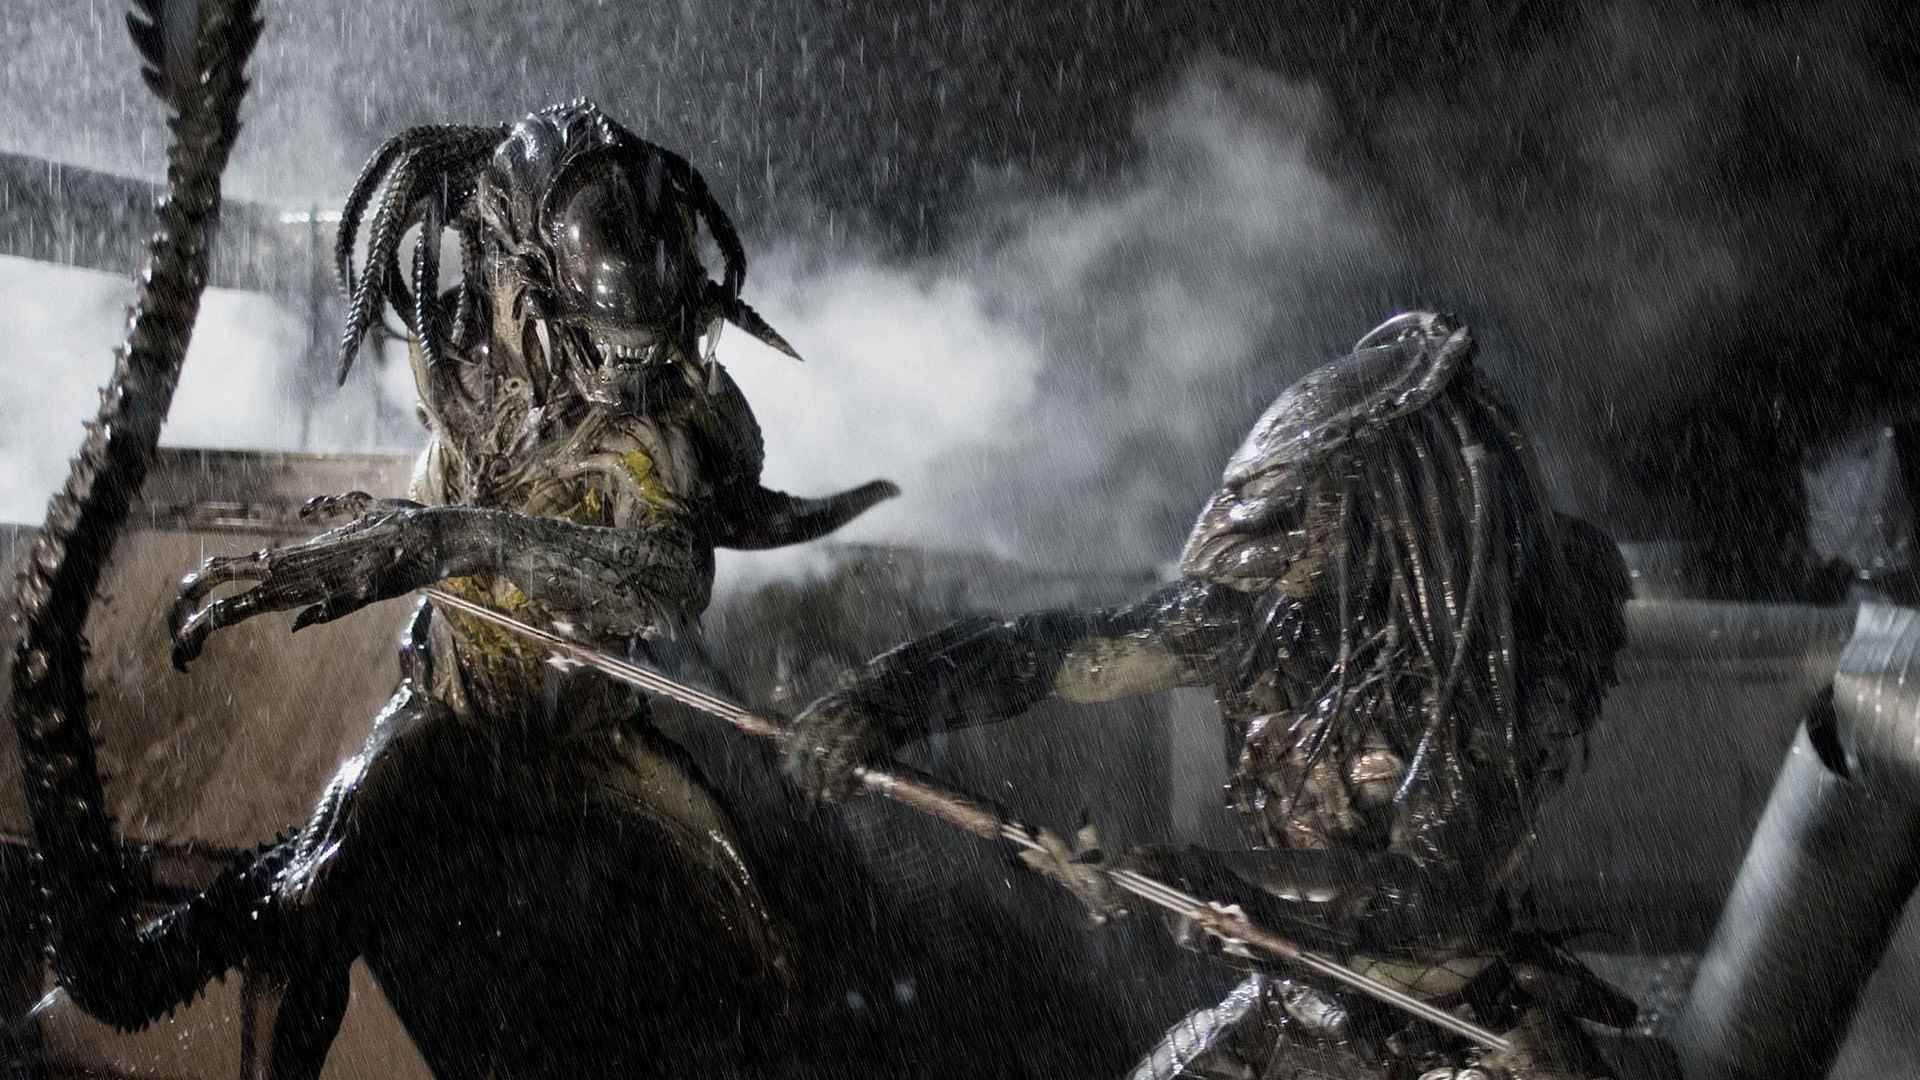 The Predator's' Timeline Is Less Complicated Than It Seems